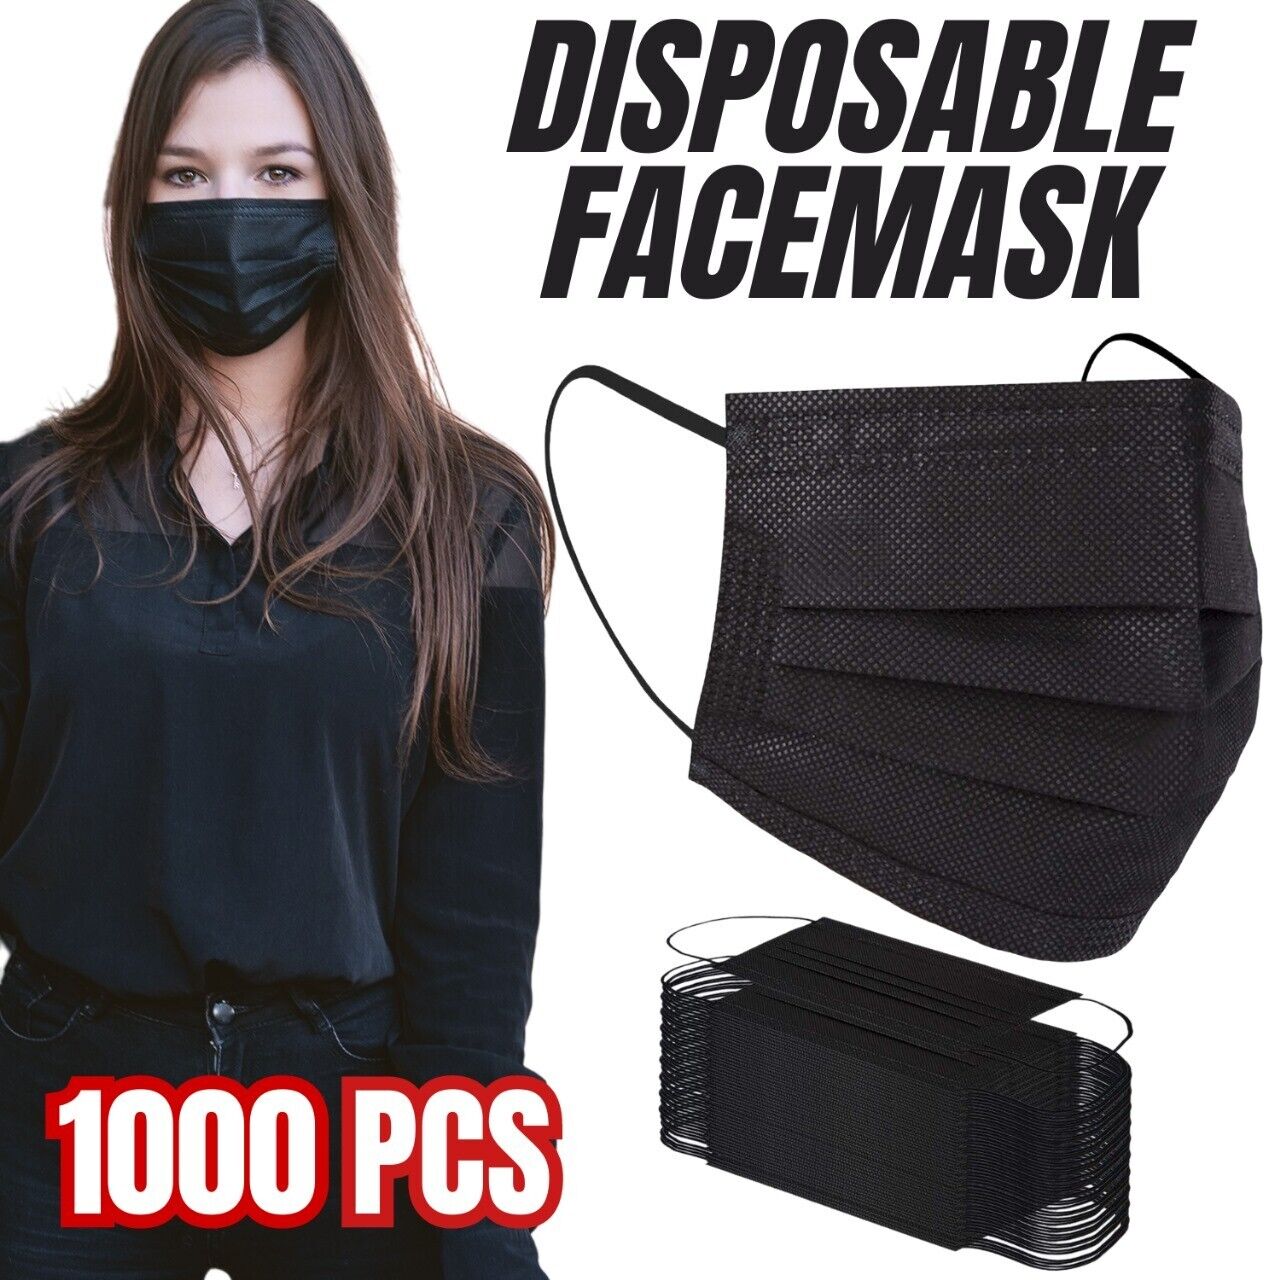 1000 PCS Protective Disposable Face Mask Cover 3 Ply Disposable Masks - Black